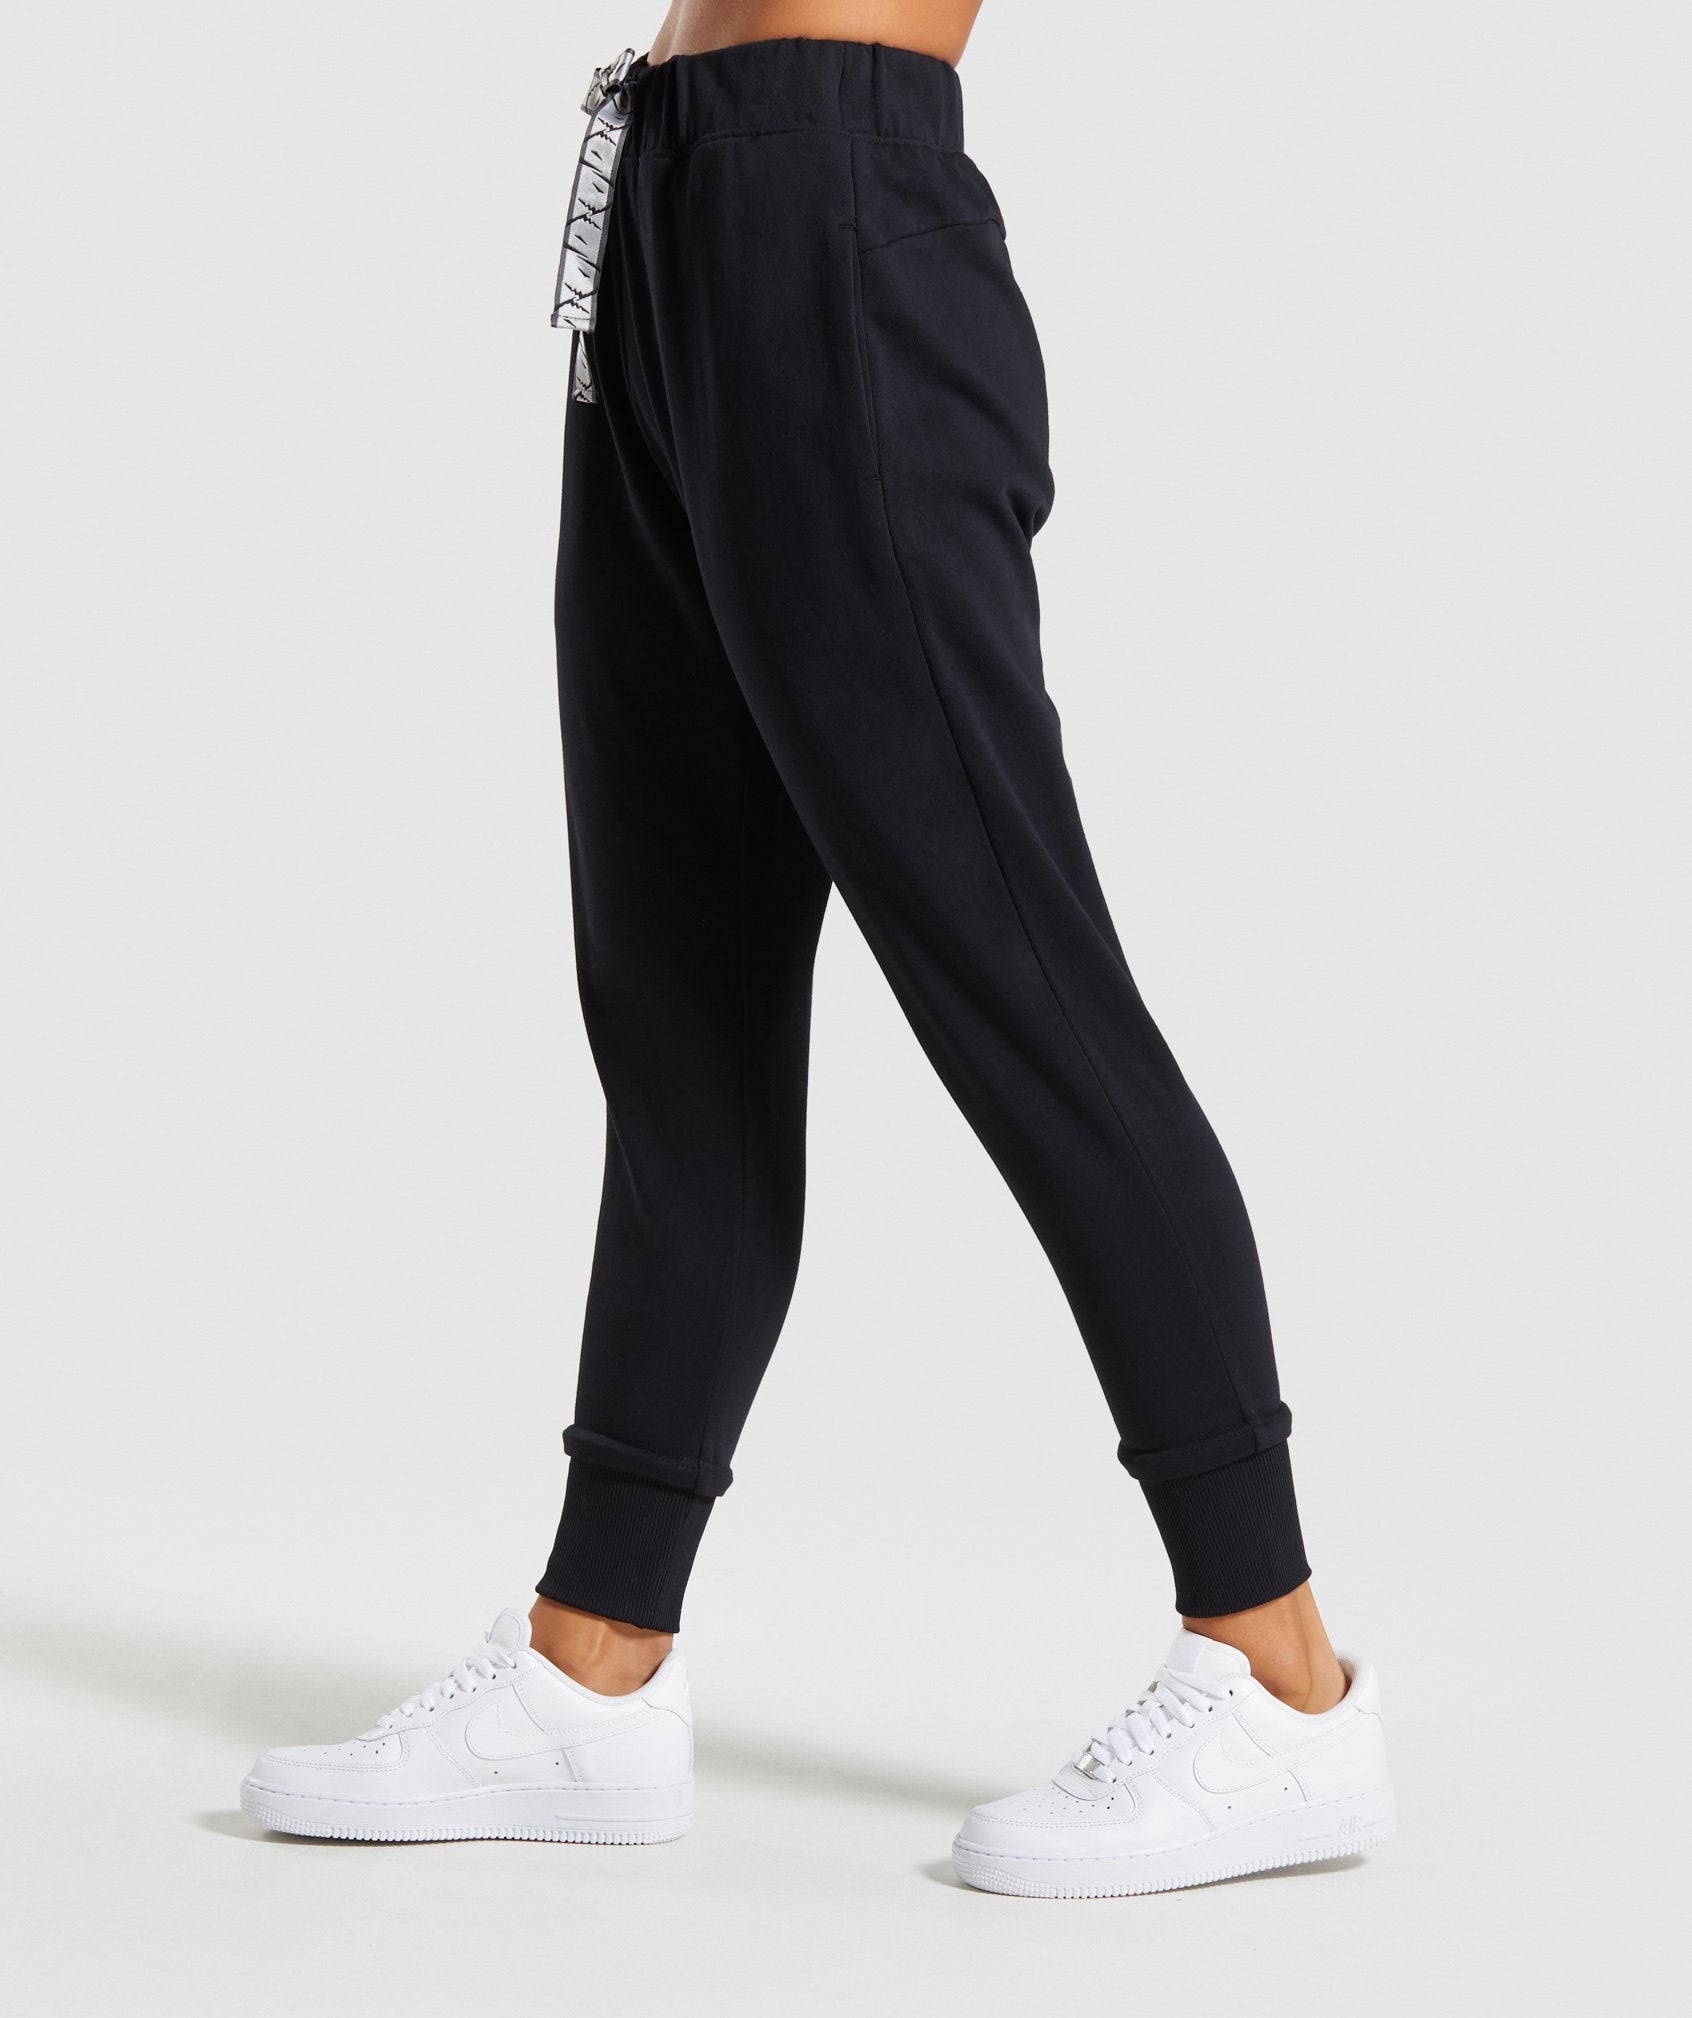 24/7 Joggers in Black - view 3